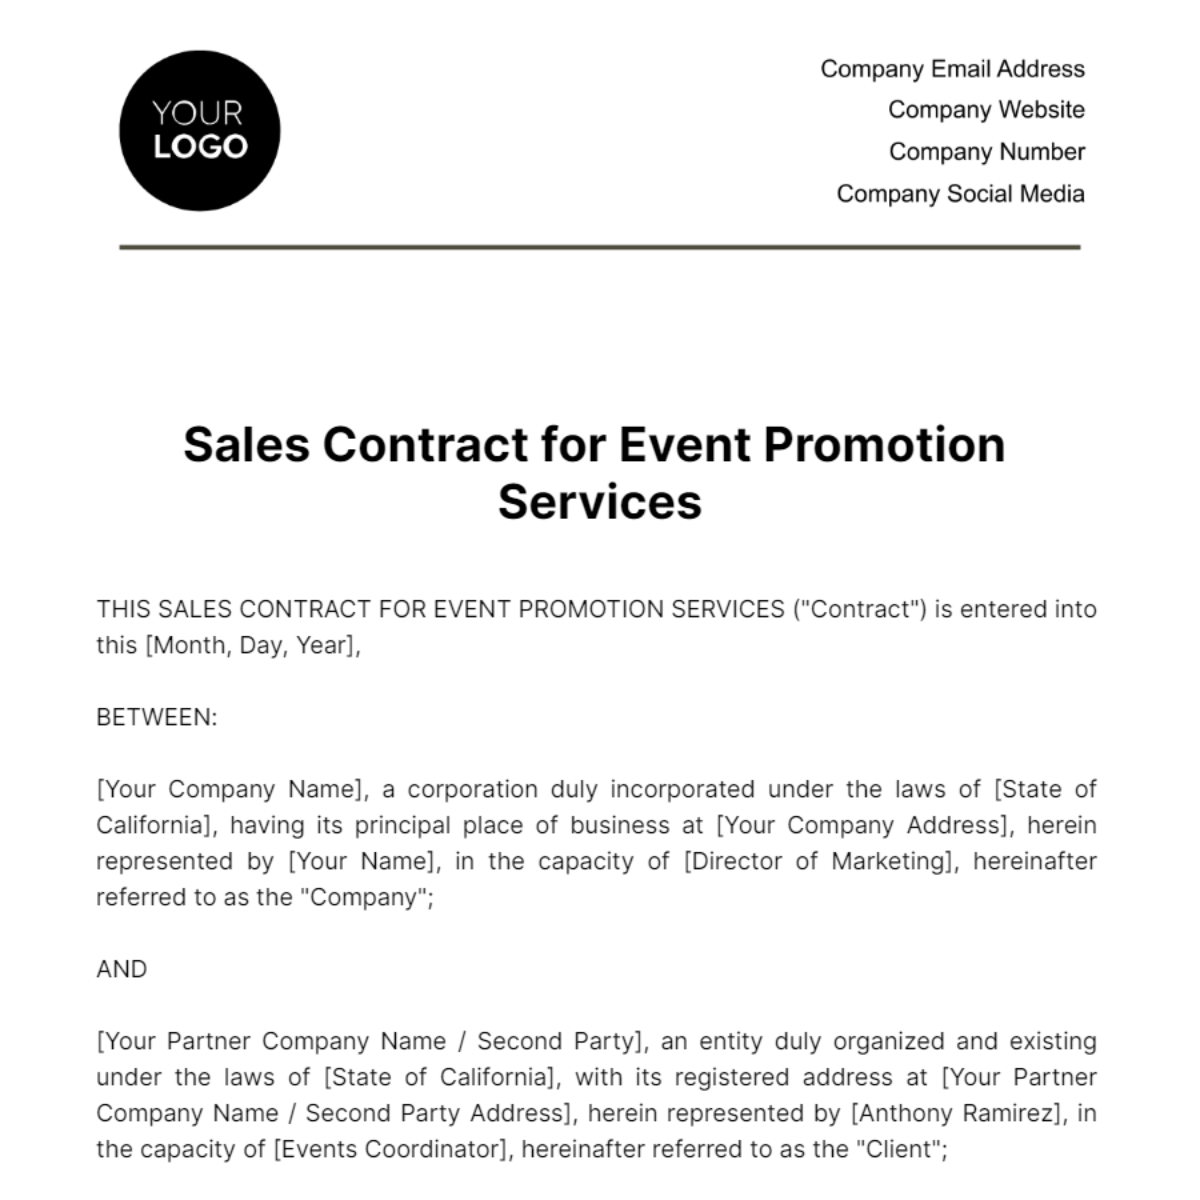 Free Sales Contract for Event Promotion Services Template